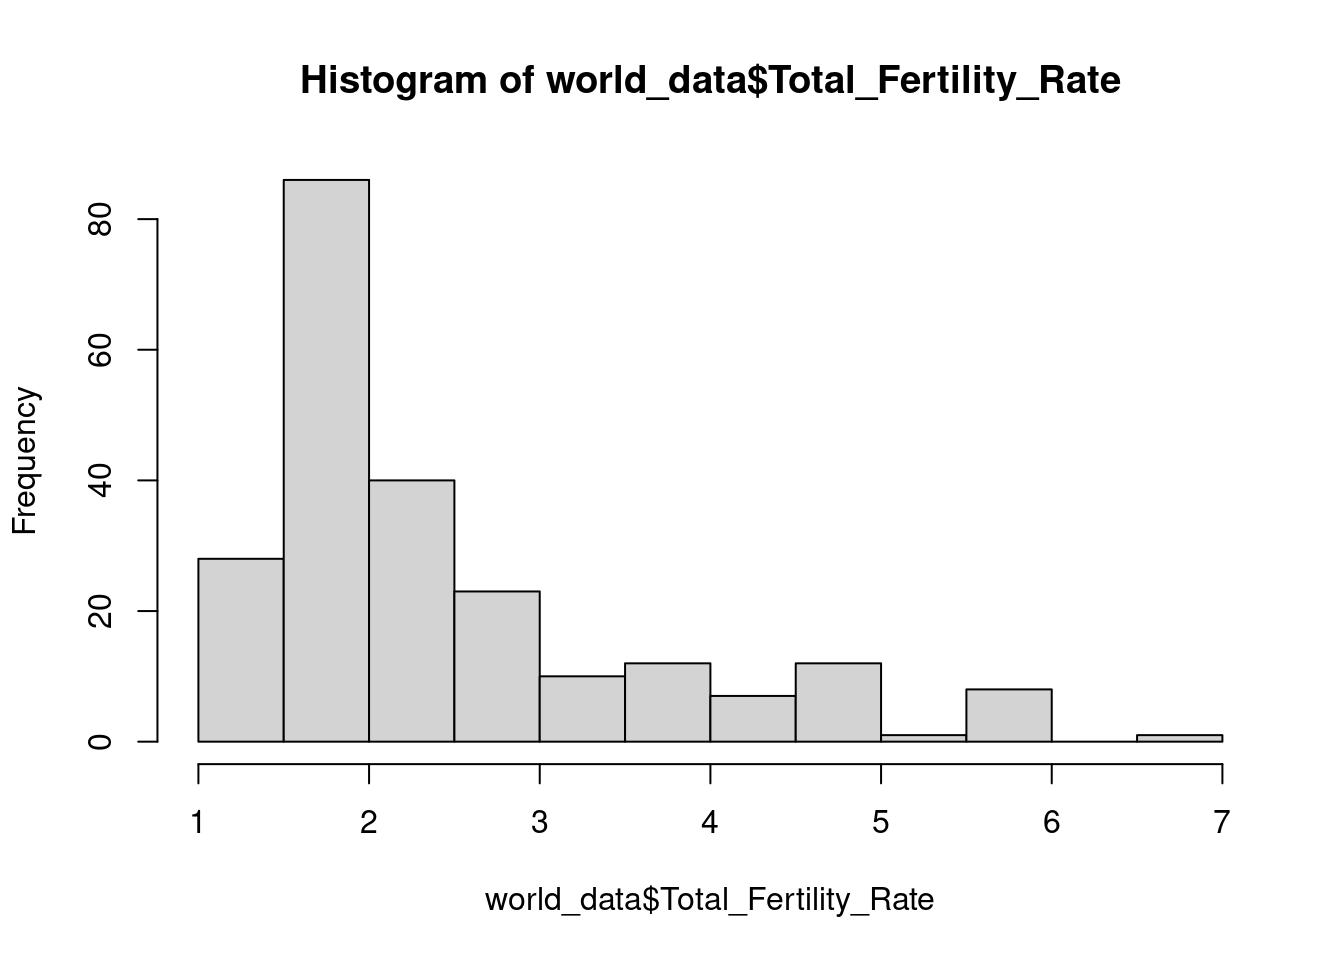 Distribution of fertility rate in the countries of the world.